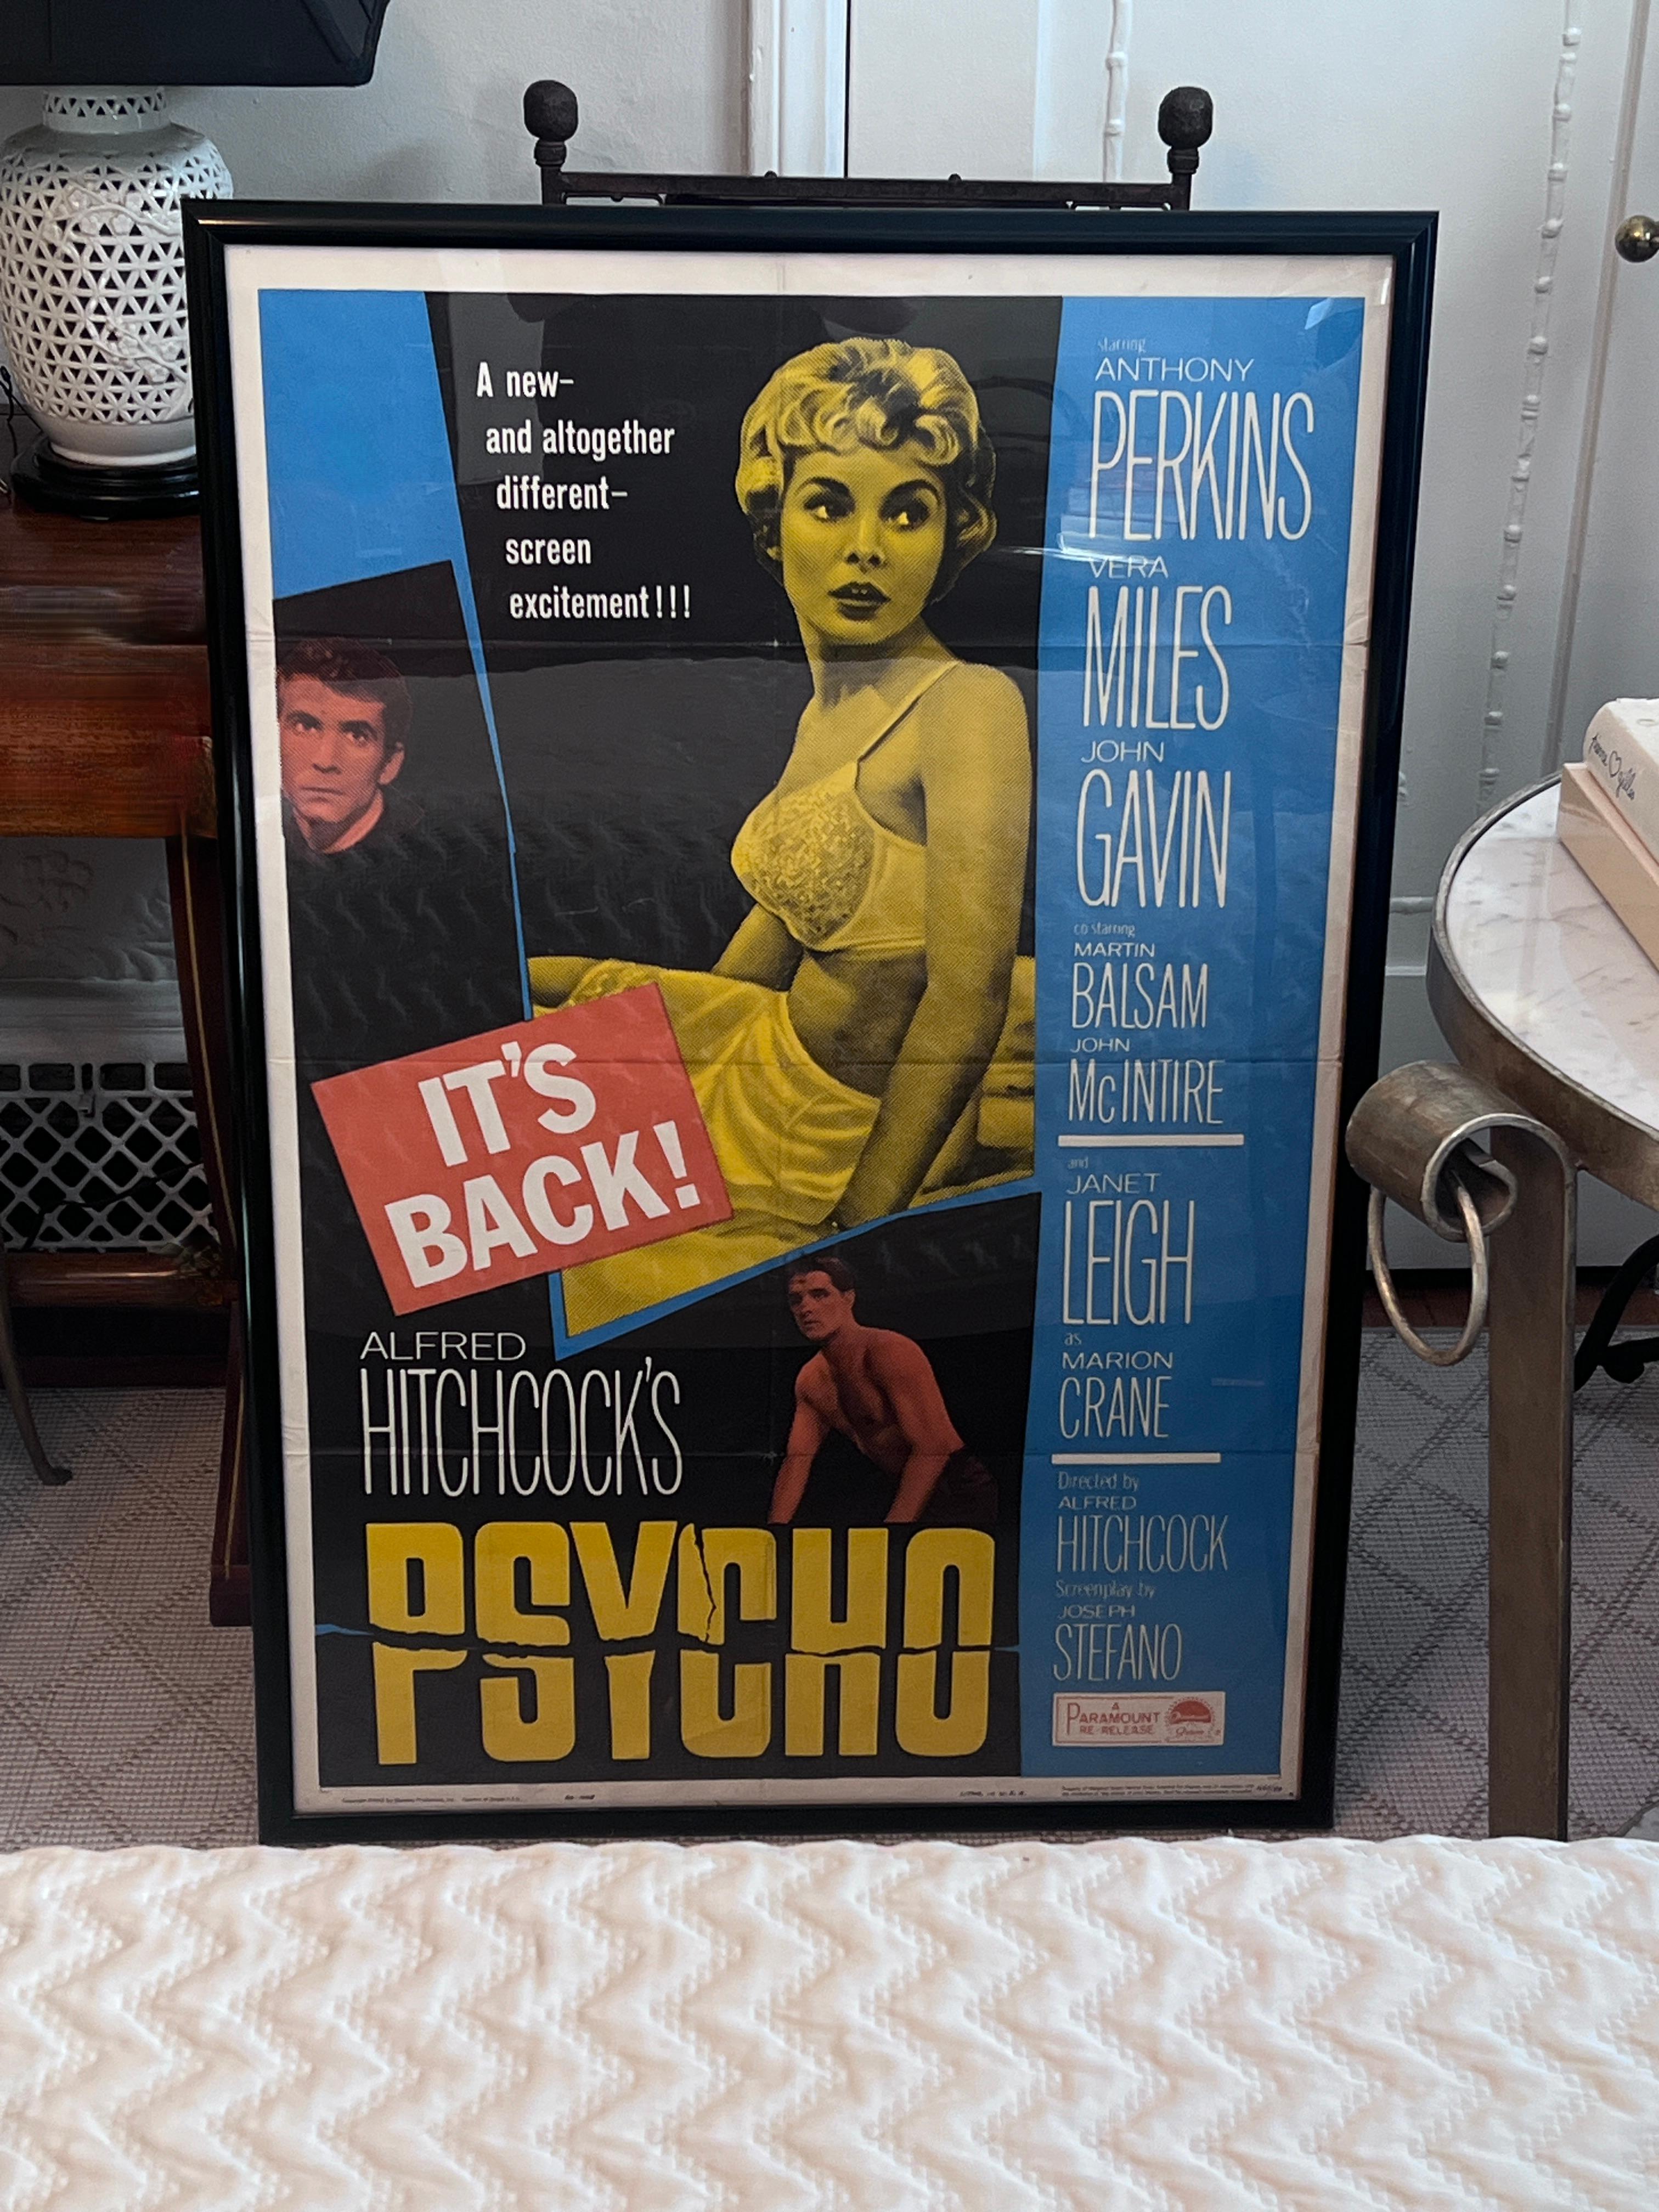 A framed movie poster for the re-release of Alfred Hitchcock's PSYCHO, starring Janet Leigh, Anthony Perkins, and Vera Miles.

The poster was folded, at one point, and some folds are visible (we think this adds to the character and authenticity.

A